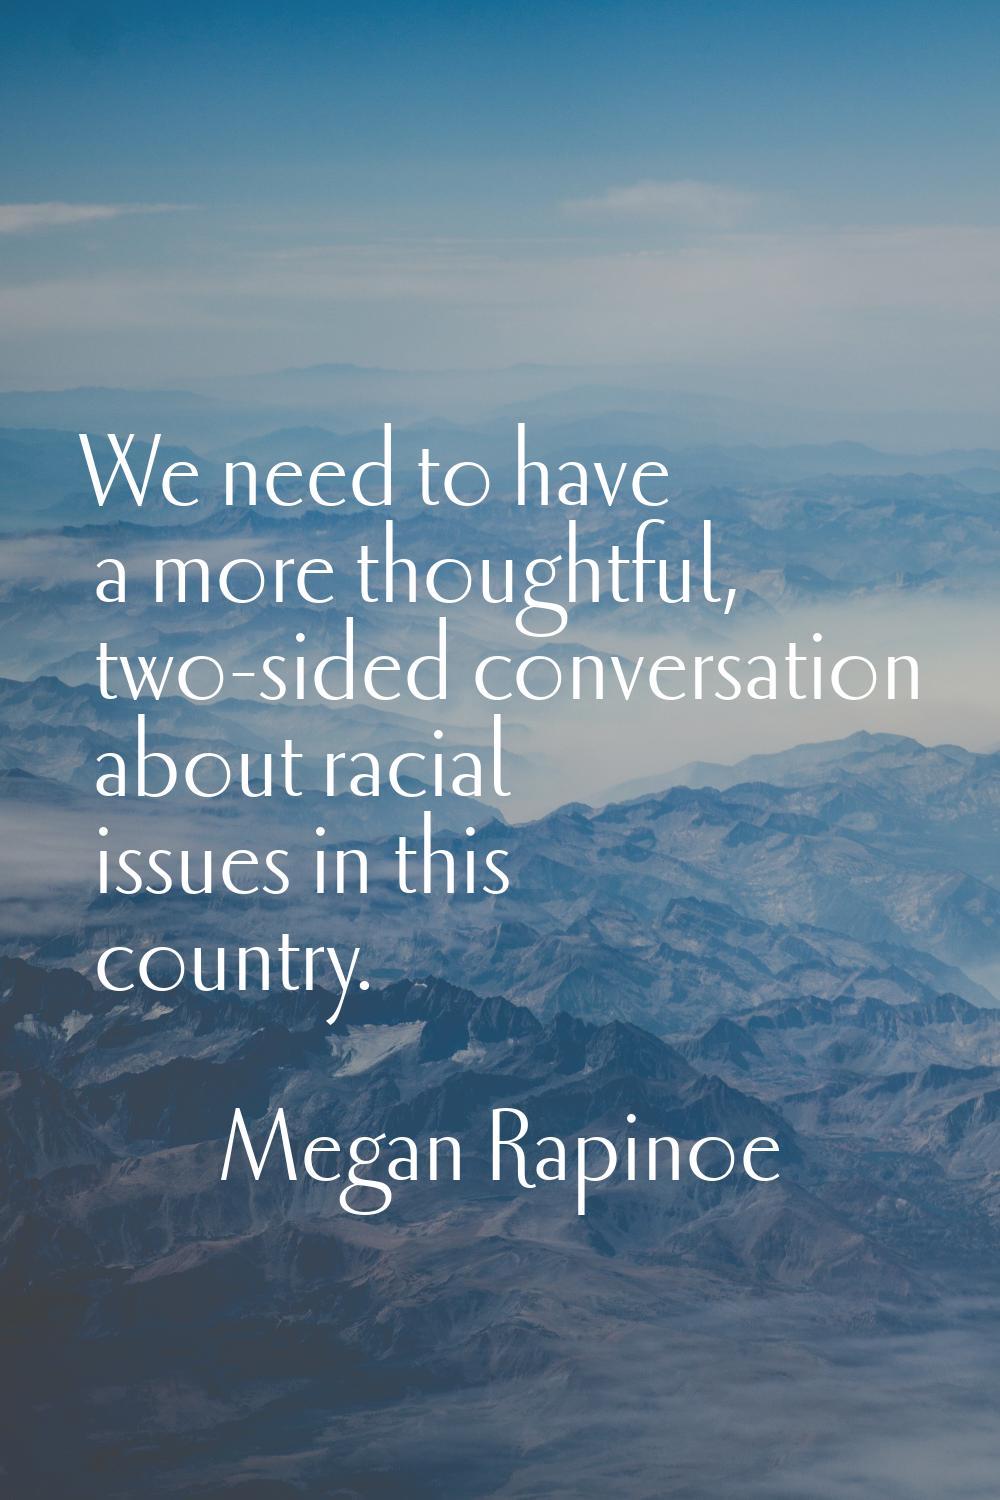 We need to have a more thoughtful, two-sided conversation about racial issues in this country.